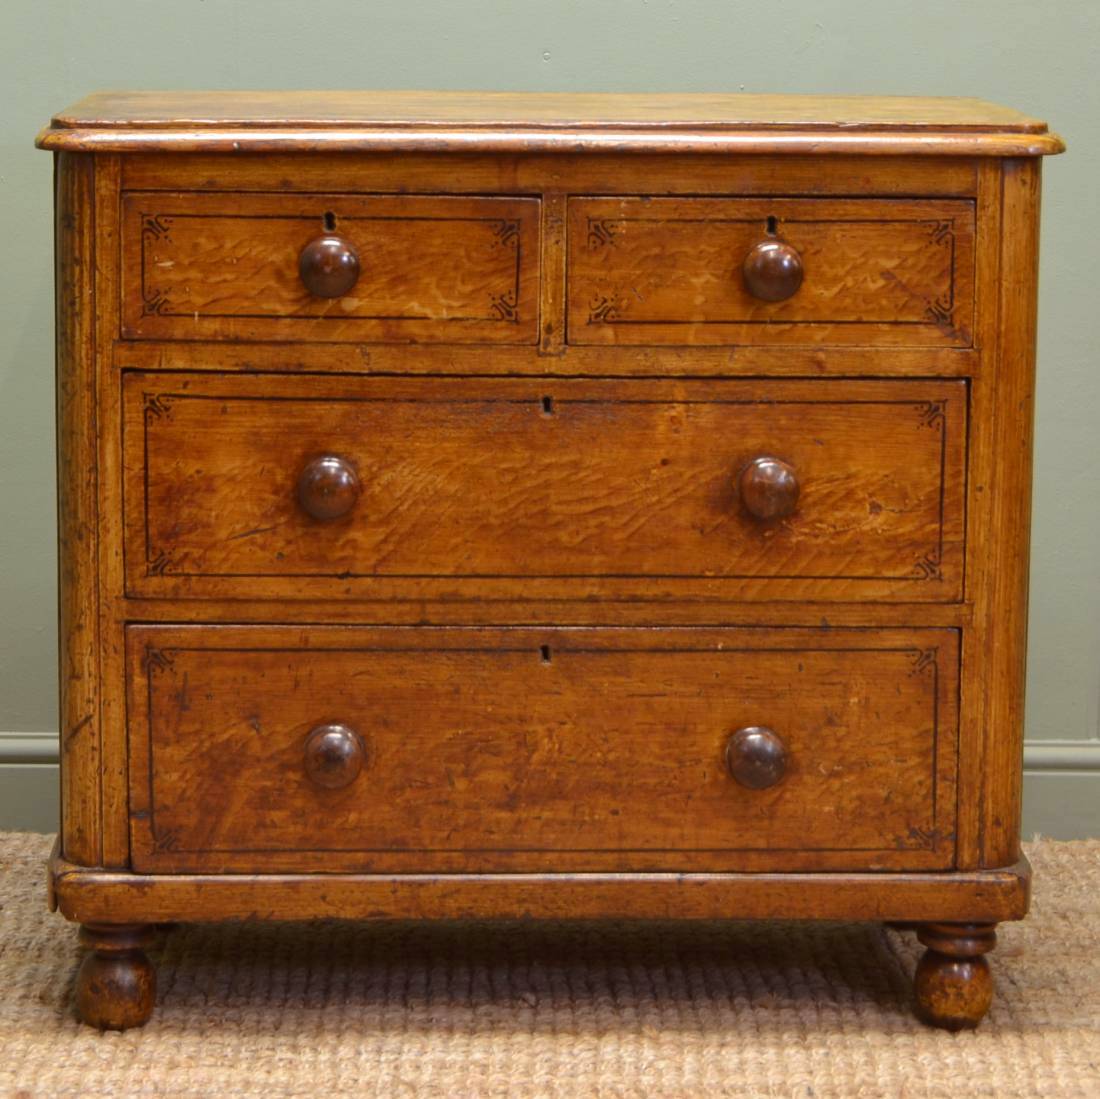 Antique Chest Of Drawers with the Original Painted Pine Finish